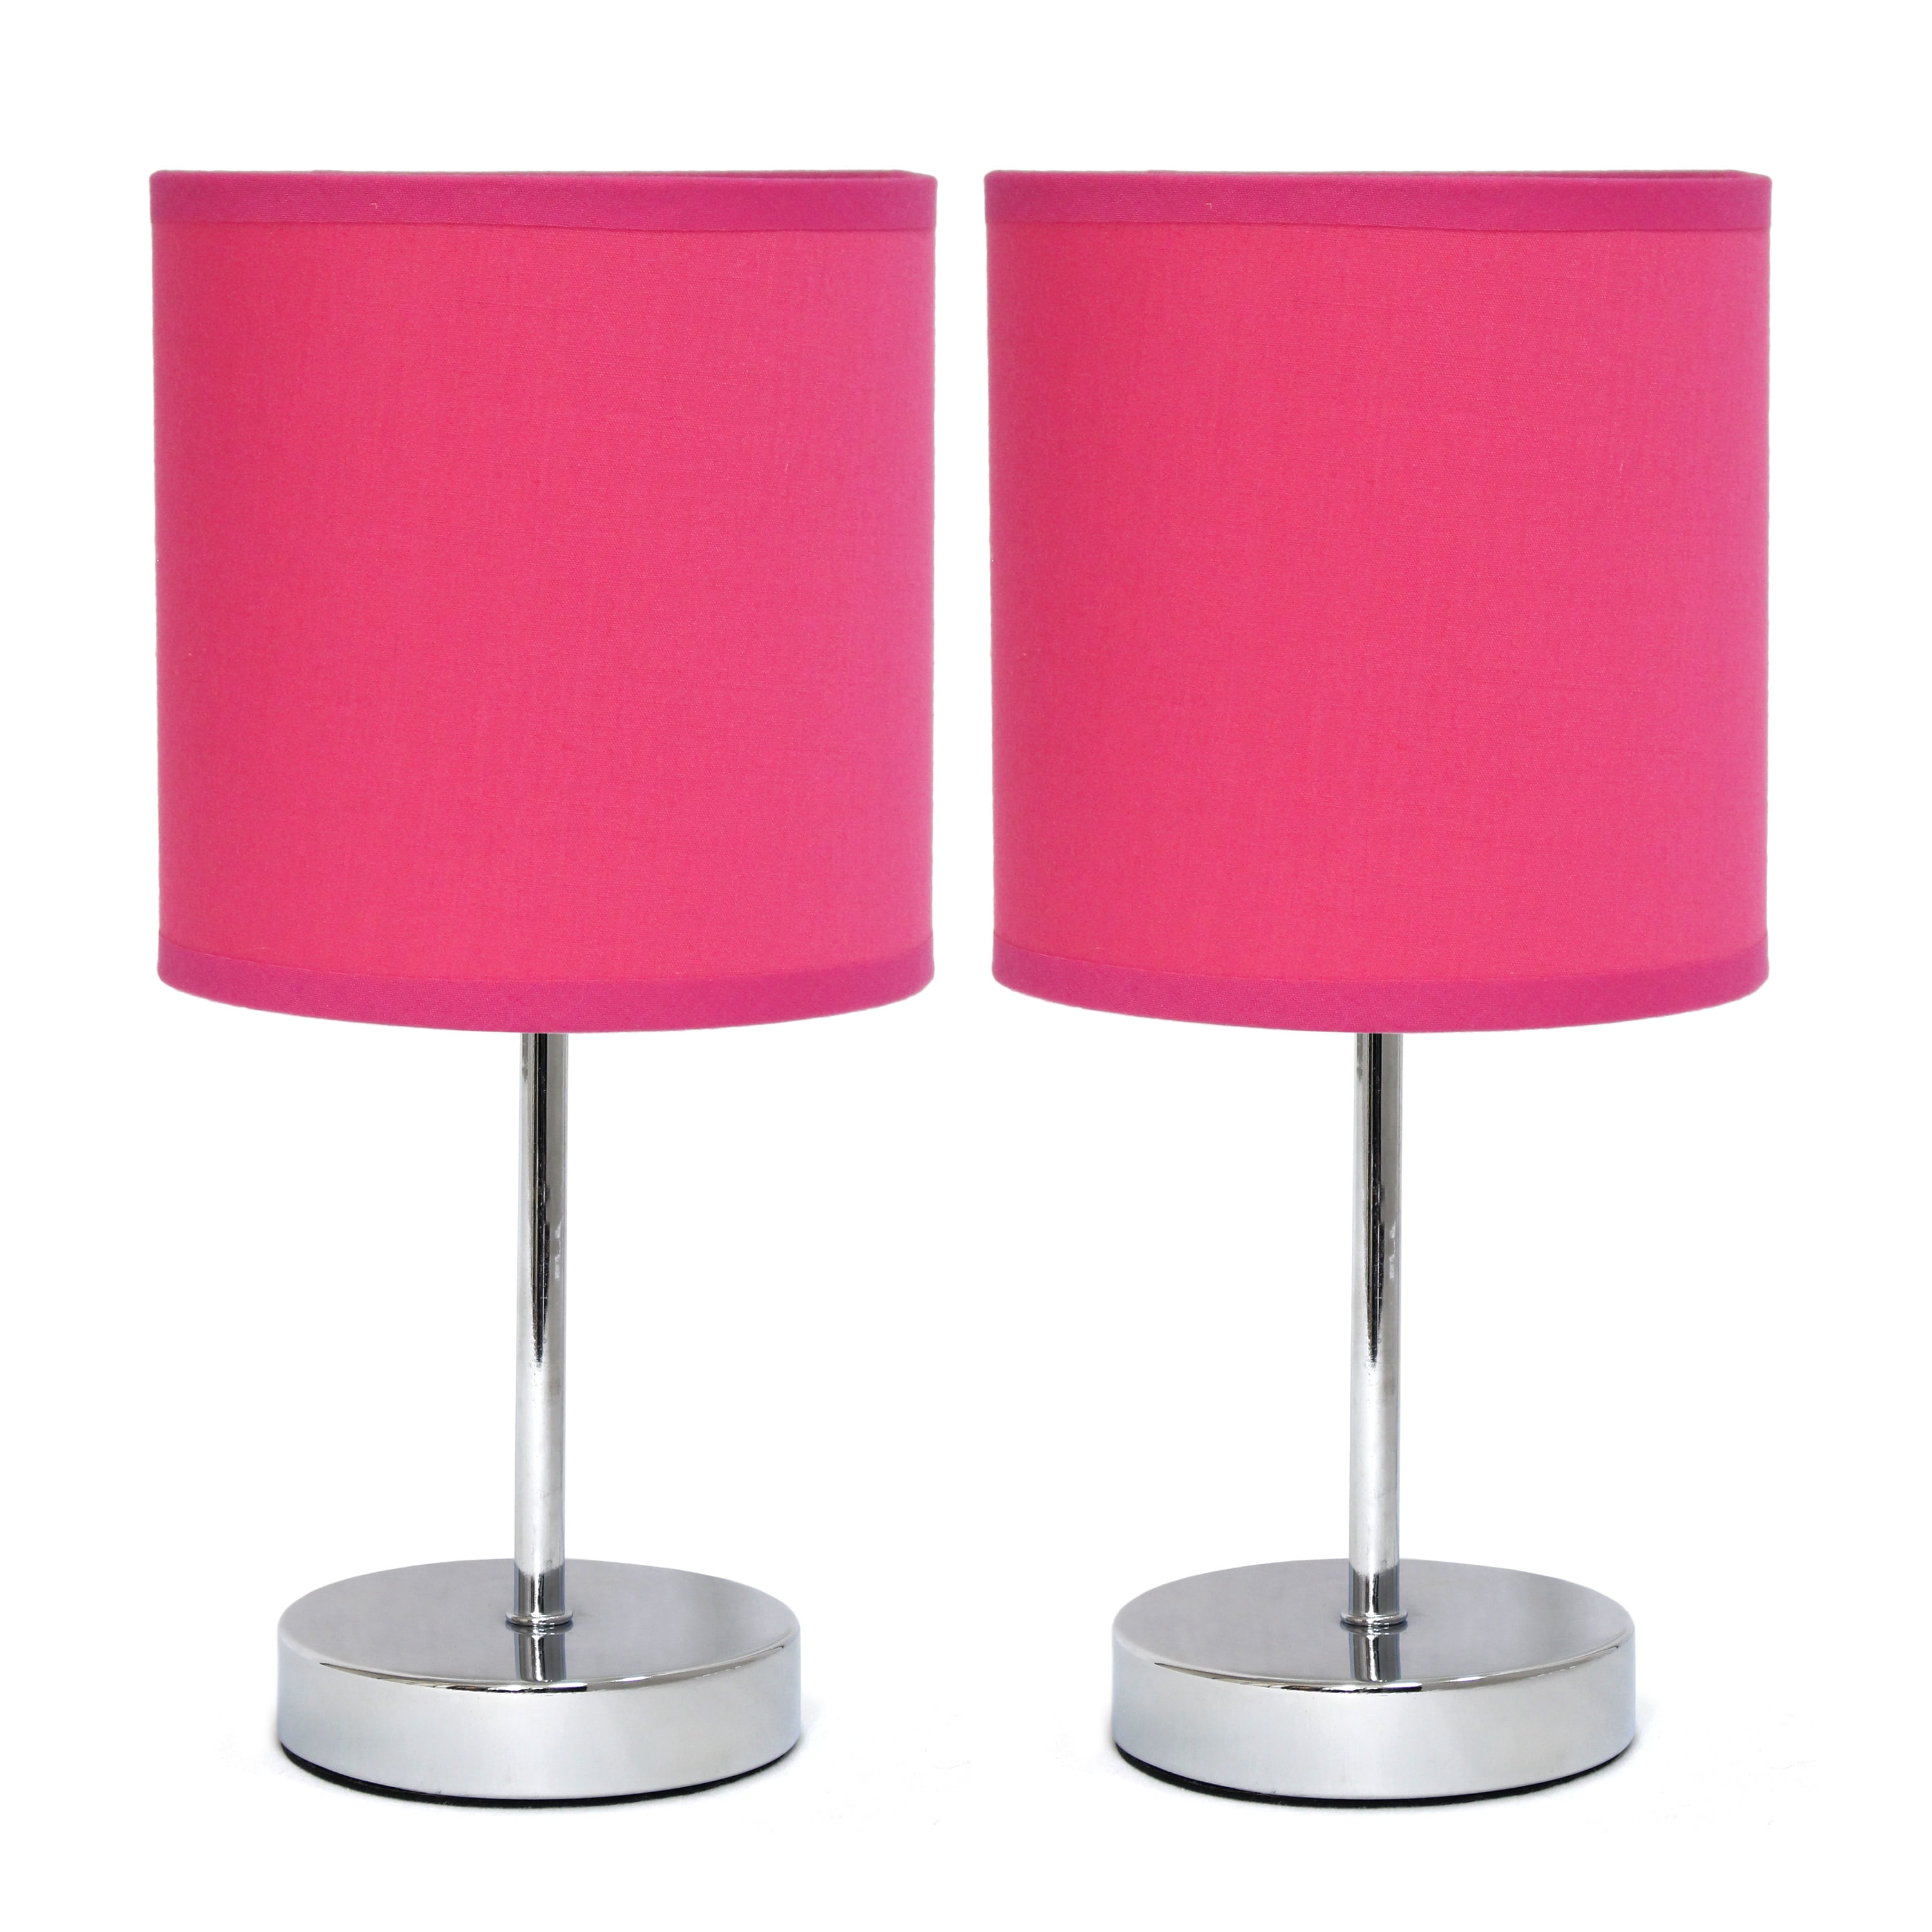 Lt2007-hpk-2pk Chrome Mini Basic Table Lamp With Fabric Shade, Hot Pink - Pack Of 2